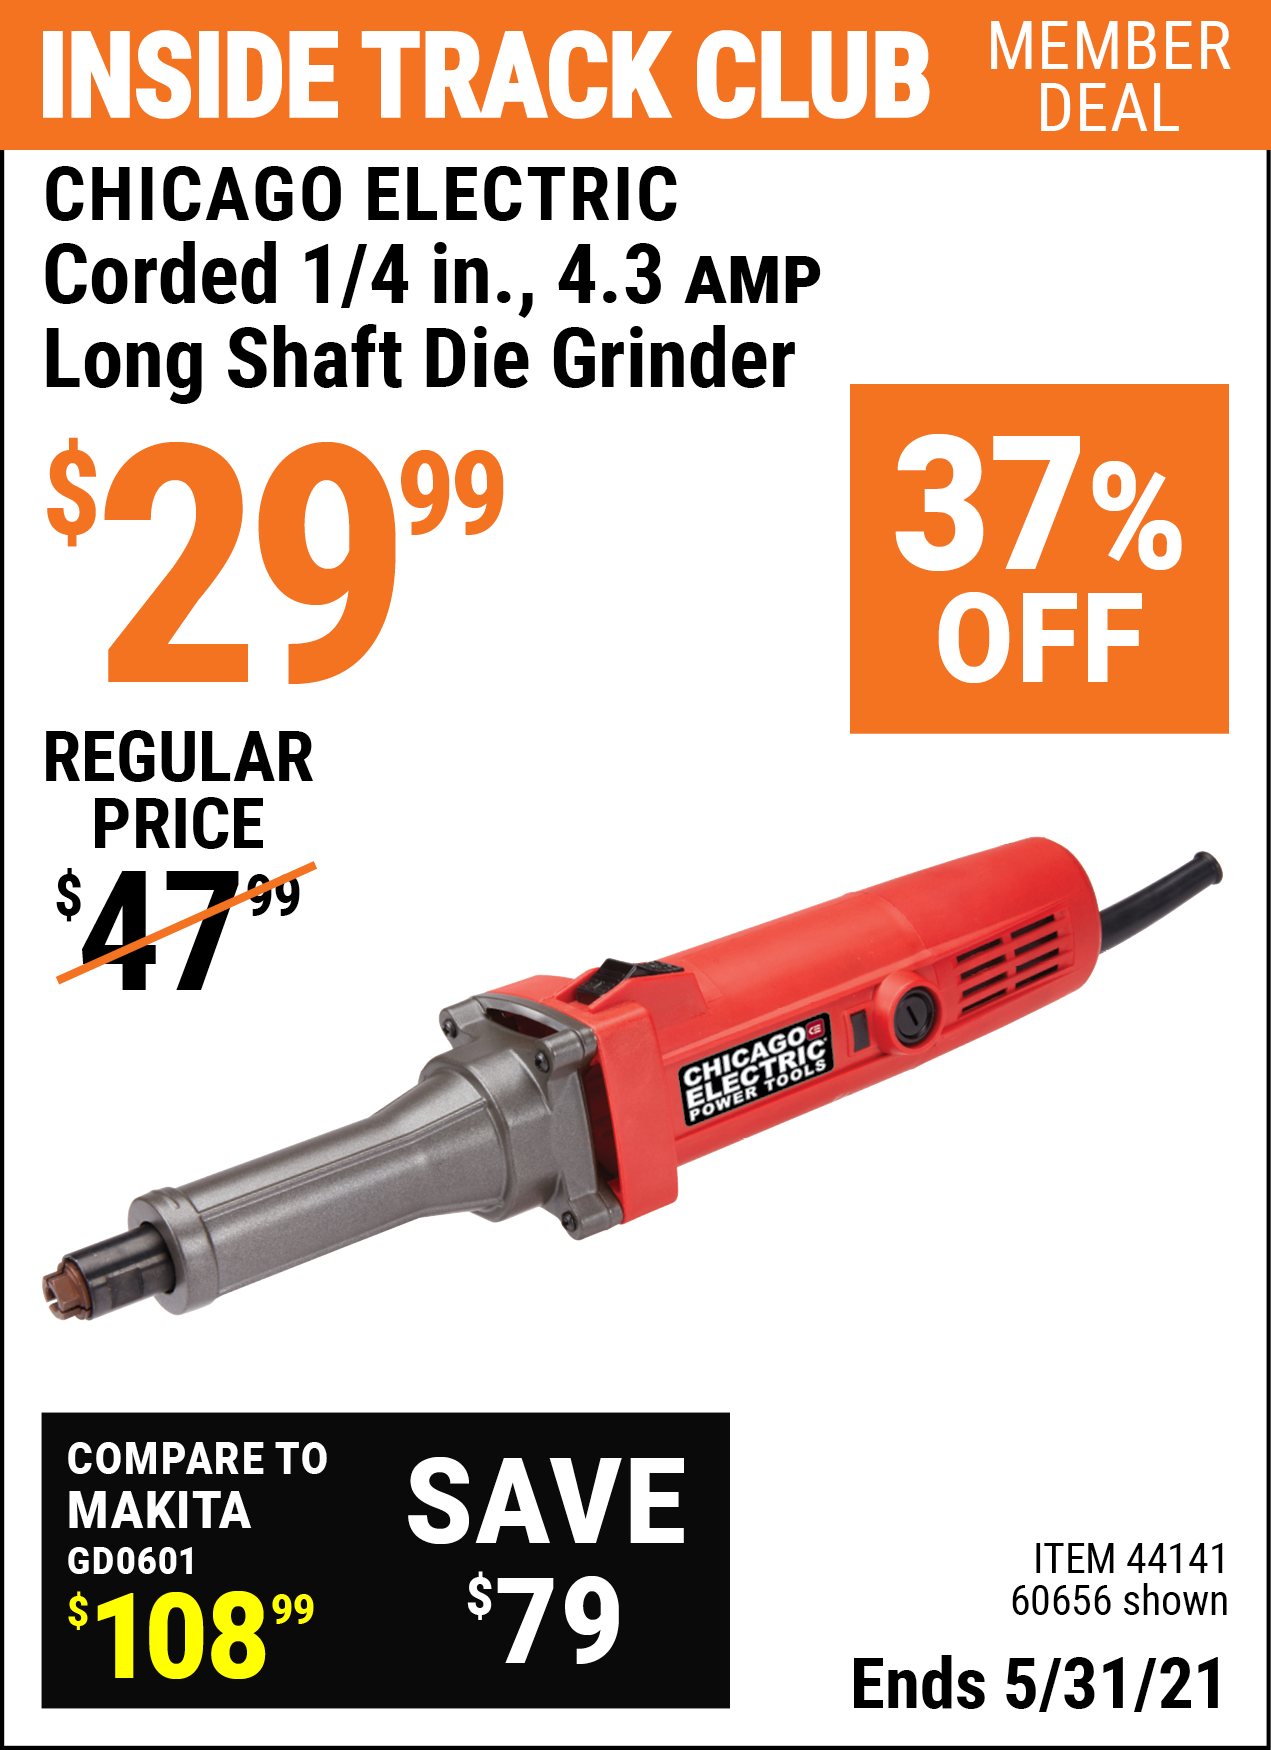 Inside Track Club members can buy the CHICAGO ELECTRIC Corded 1/4 in. 4.3 Amp Long Shaft Die Grinder (Item 60656/44141) for $29.99, valid through 5/31/2021.